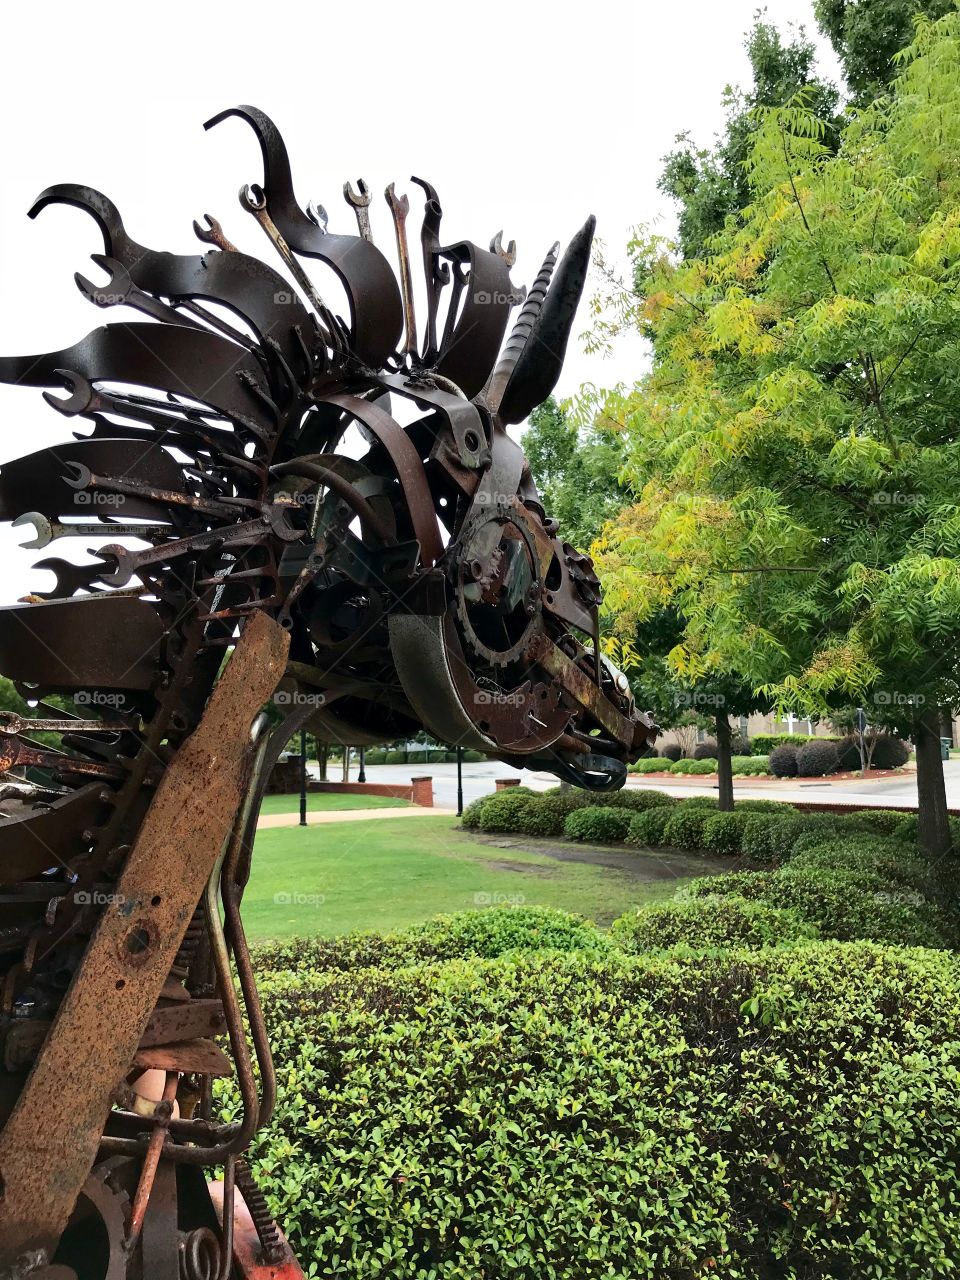 “Unicorn” by Jonathon Bowling. At the Transportation Museum in Fayetteville, NC